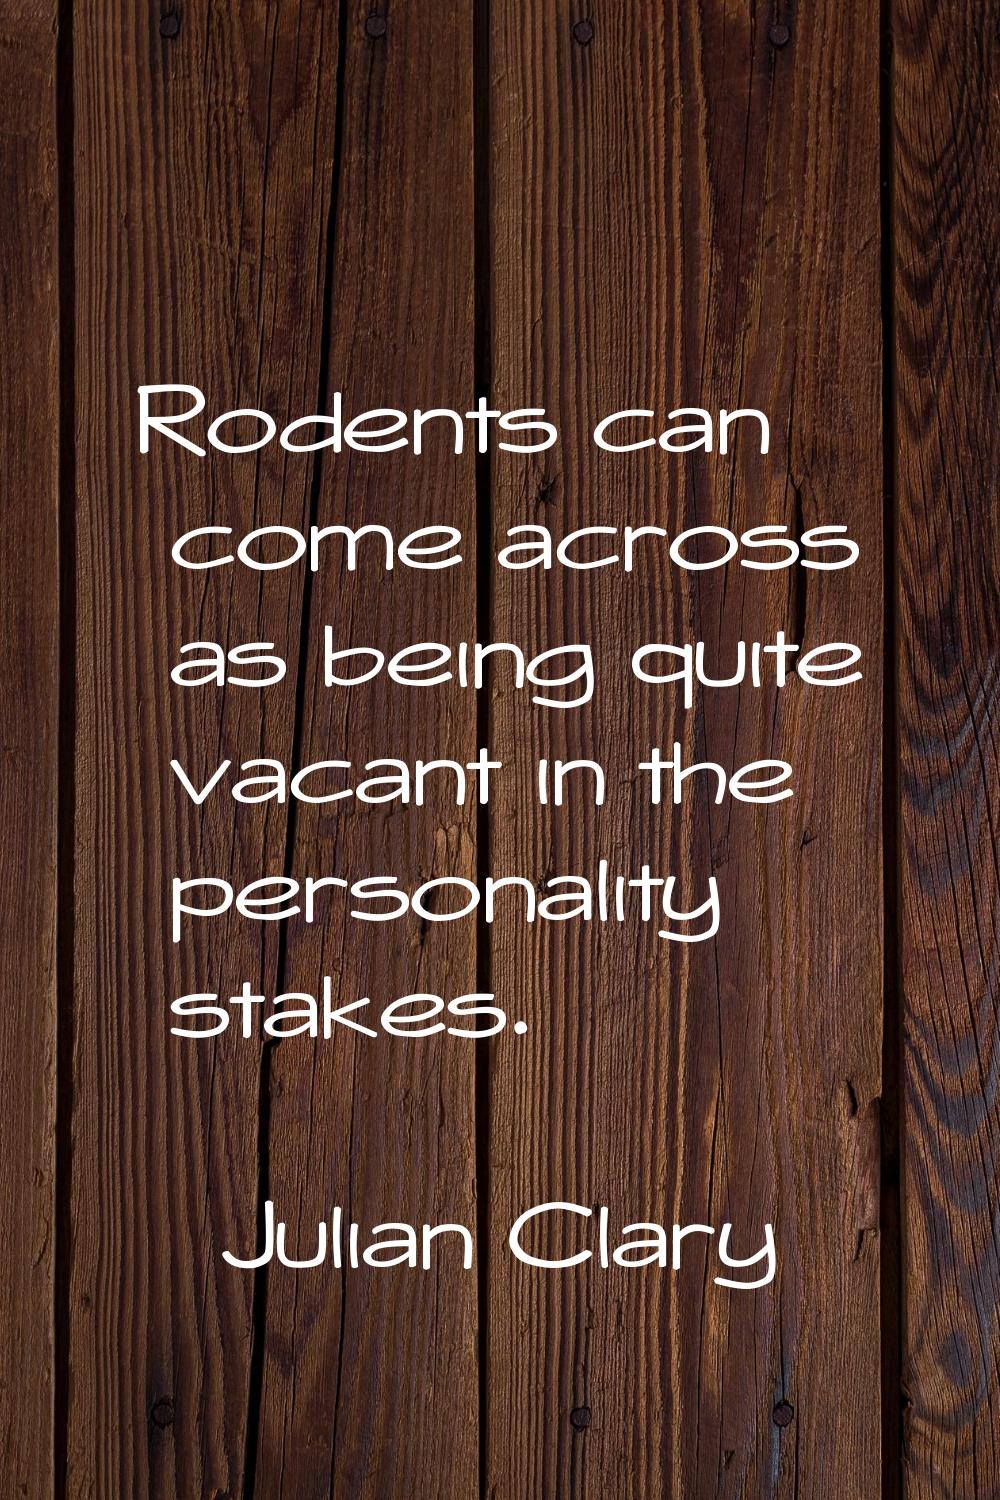 Rodents can come across as being quite vacant in the personality stakes.